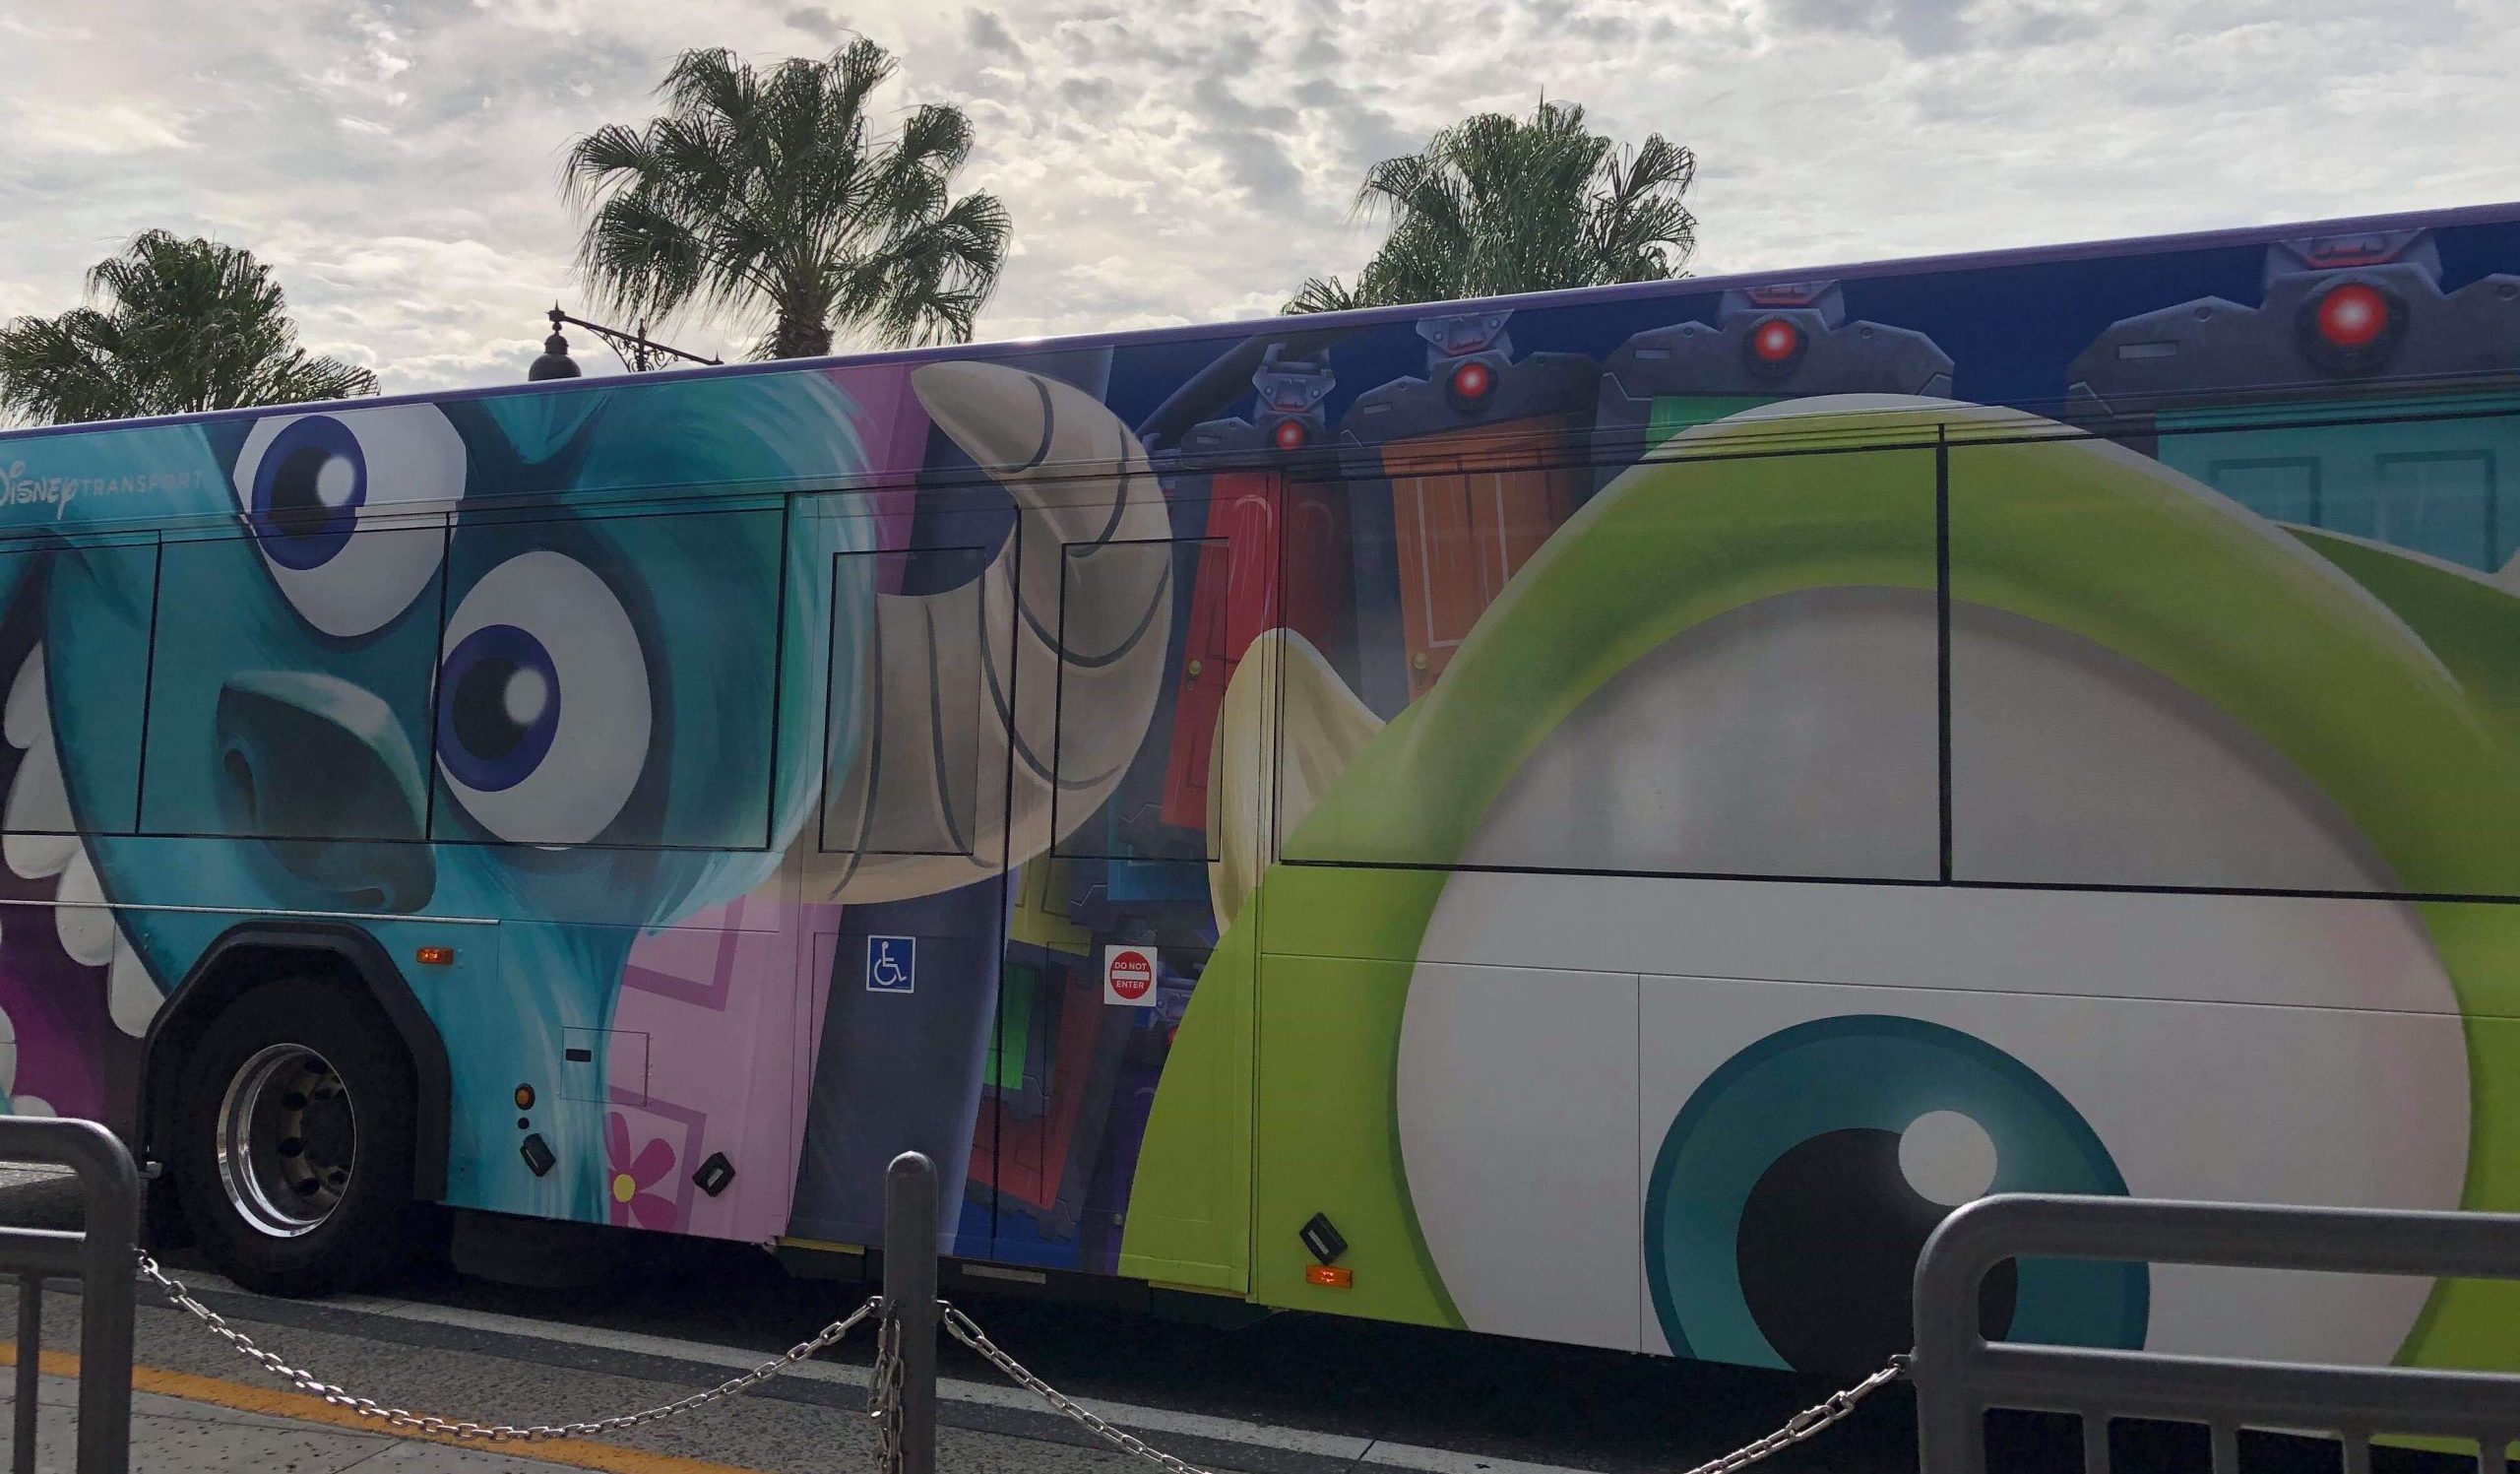 A New ‘Monsters Inc’ Bus Has Been Spotted at Walt Disney World